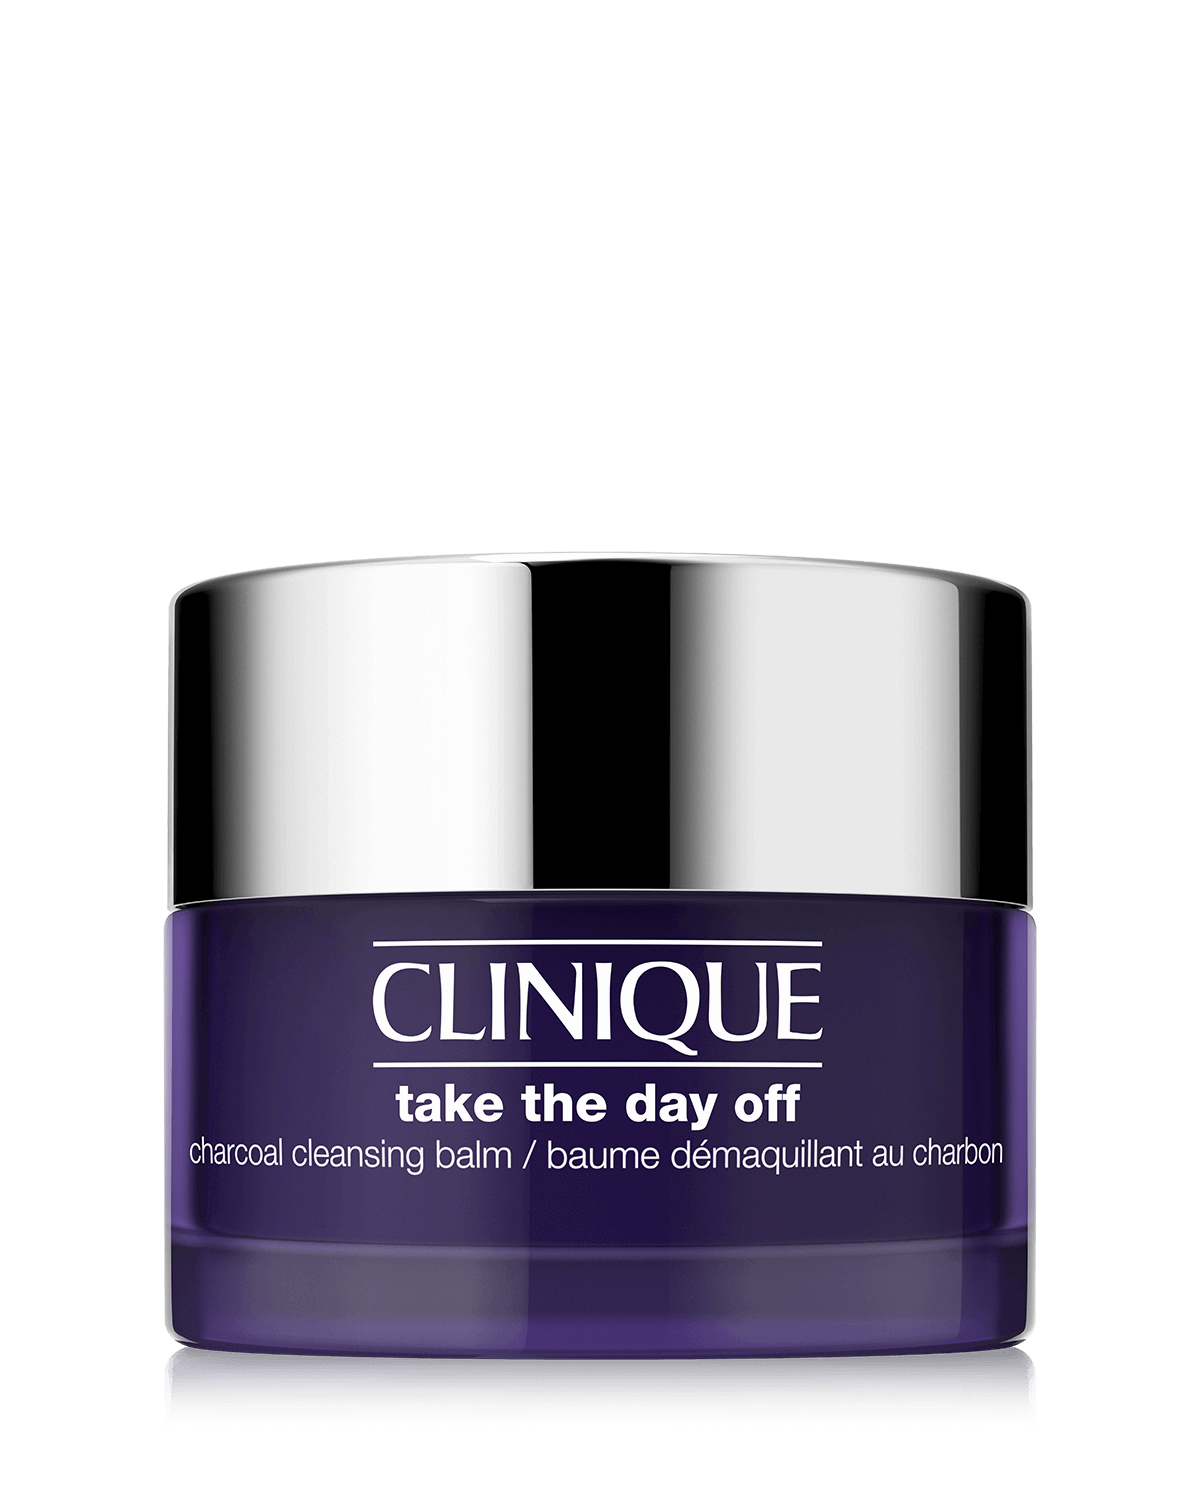 NEW Take The Day Off™ Charcoal Cleansing Balm